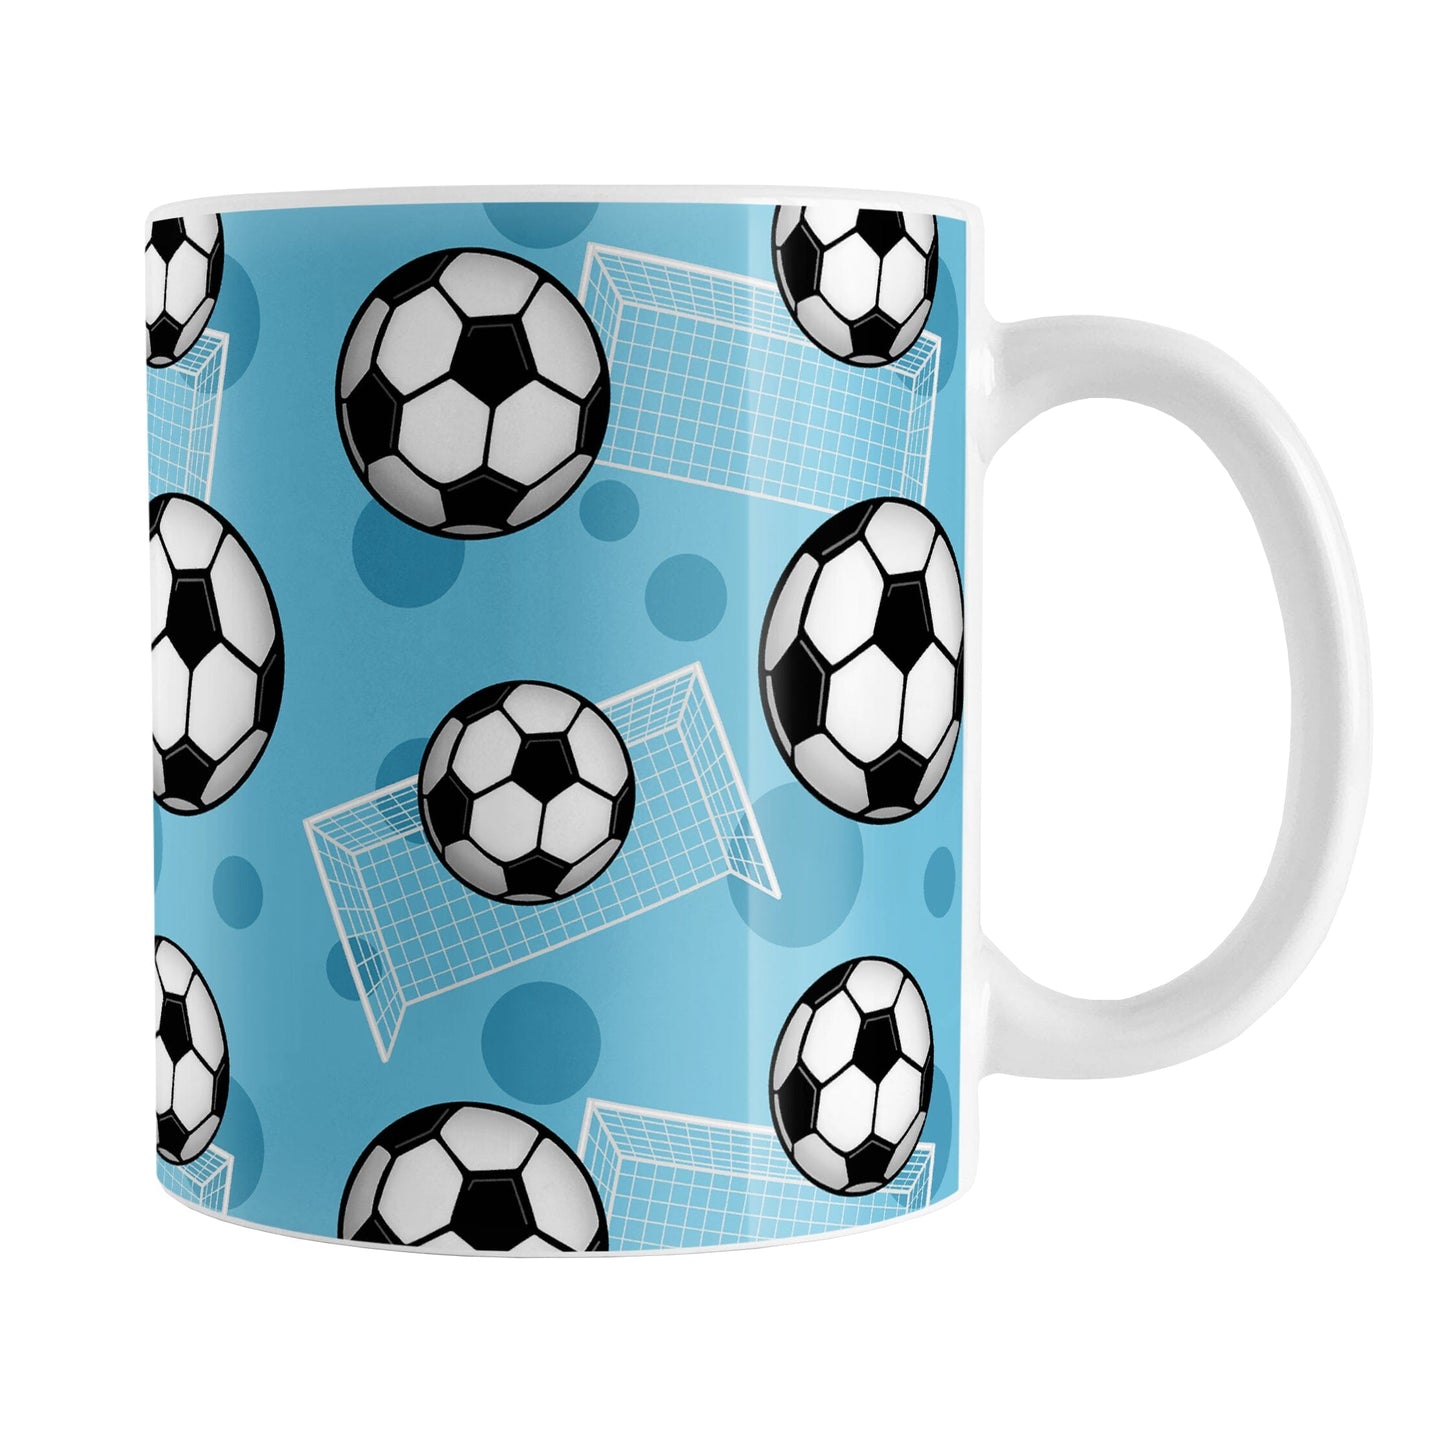 Soccer Ball and Goal Pattern Blue Mug (11oz) at Amy's Coffee Mugs. A ceramic coffee mug designed with a pattern of soccer balls and soccer goals over a blue background color with blue circles. 